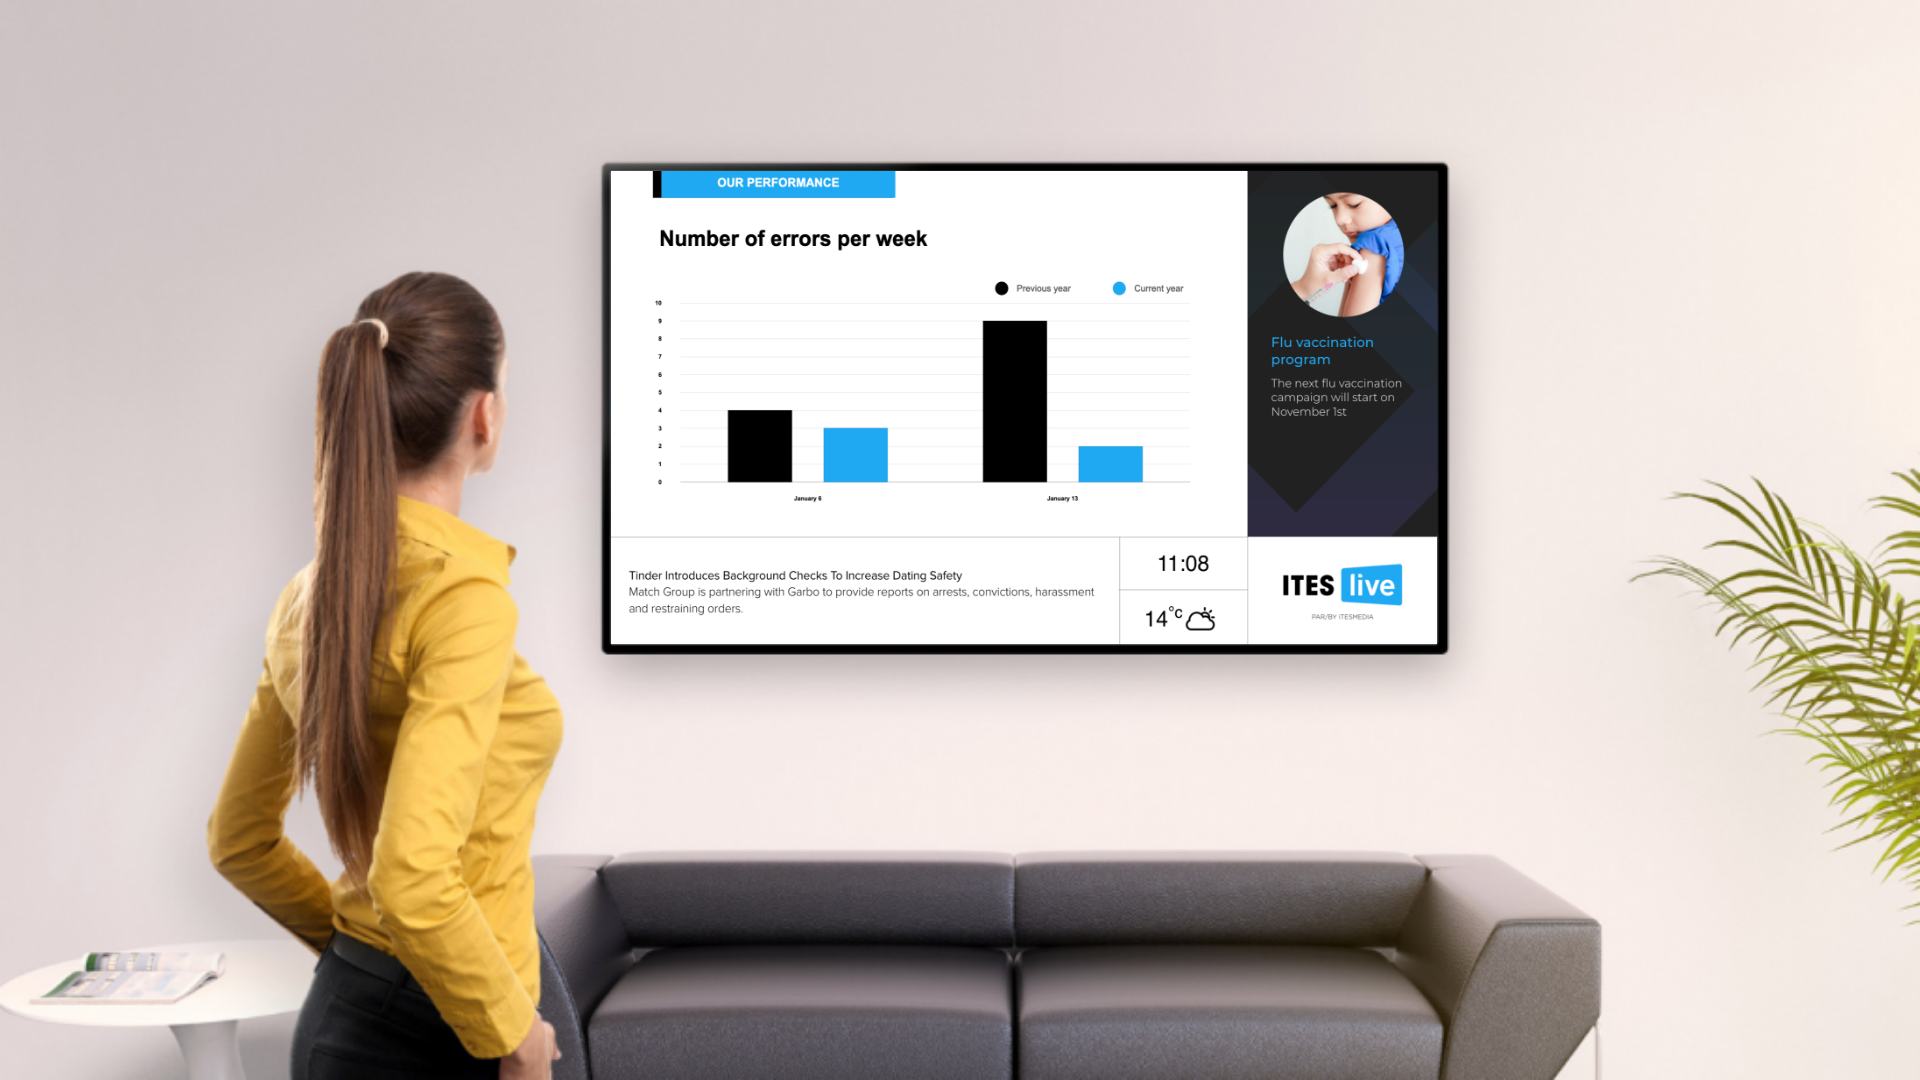 Video - The advantage of a multi-zone display for internal communication